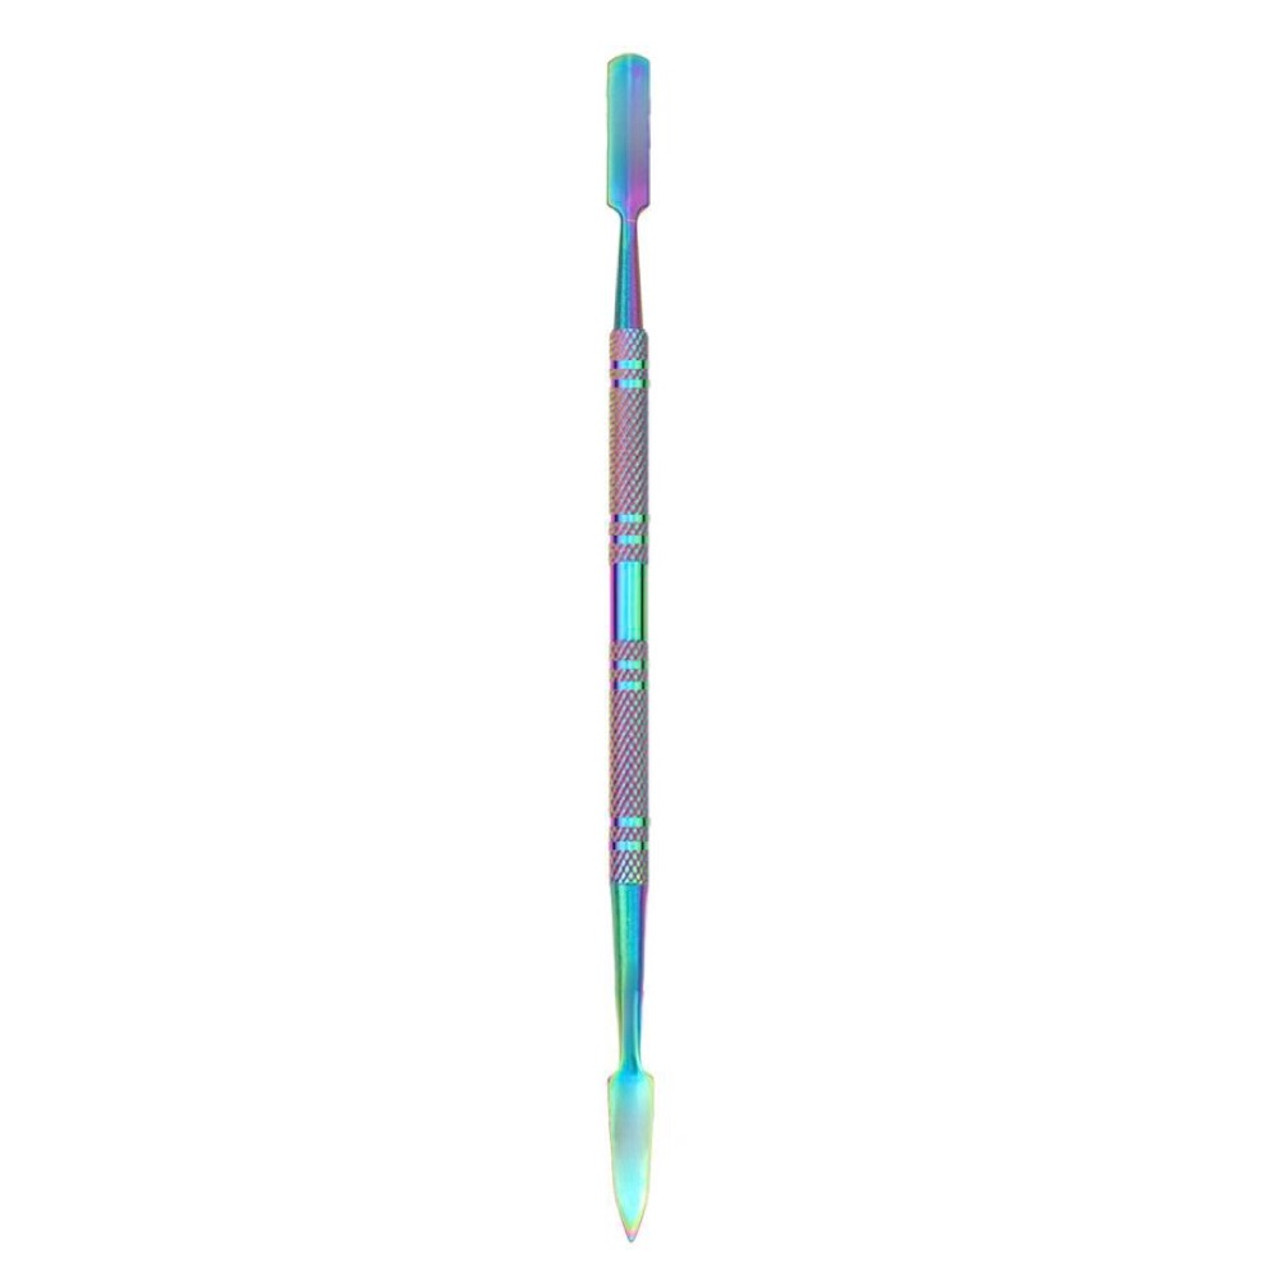 6.7 Inch Quartz Dabber Shovel Dab Tool Wax Oil Dabs Vaporizer Tools With  5mm Quartz Rods Nail Glass Pen Tool Water Smoking From Goodsstore, $0.83